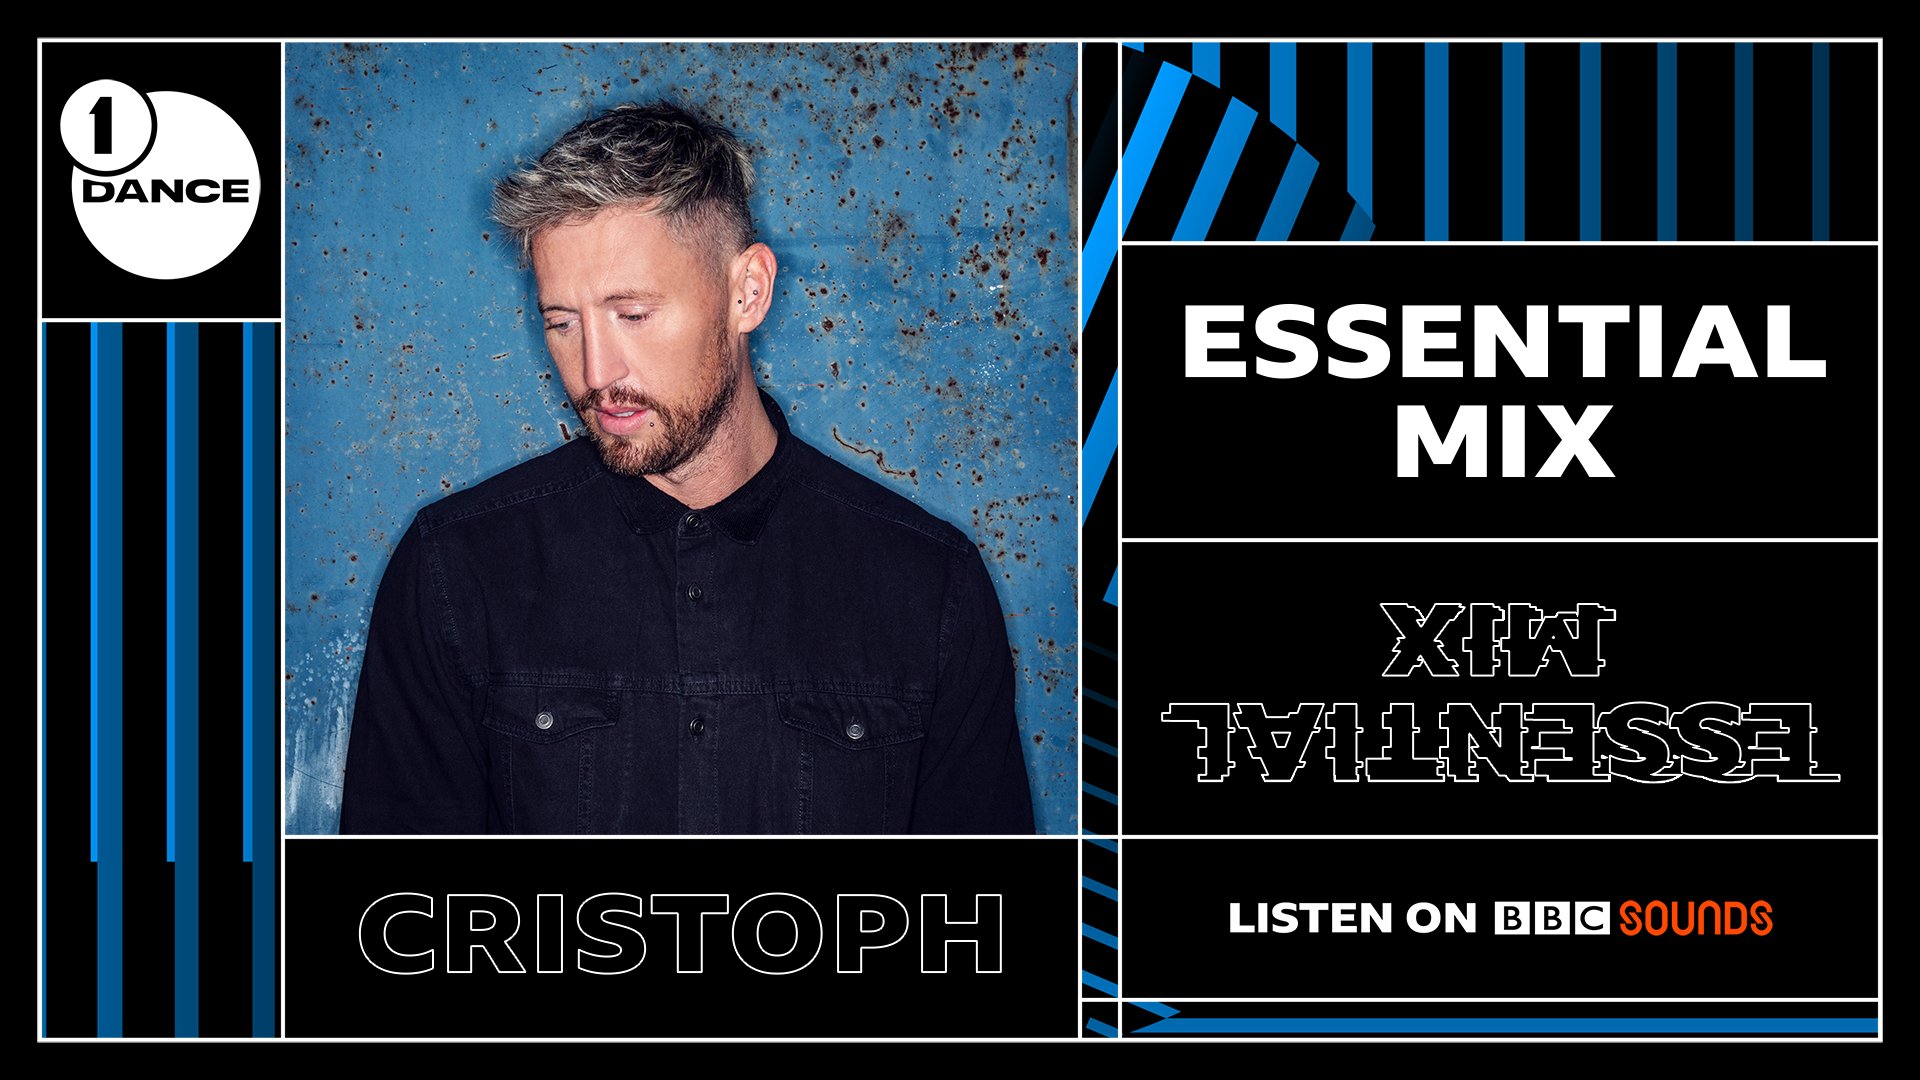 Cristoph Will Air His BBC Essential Mix This Friday